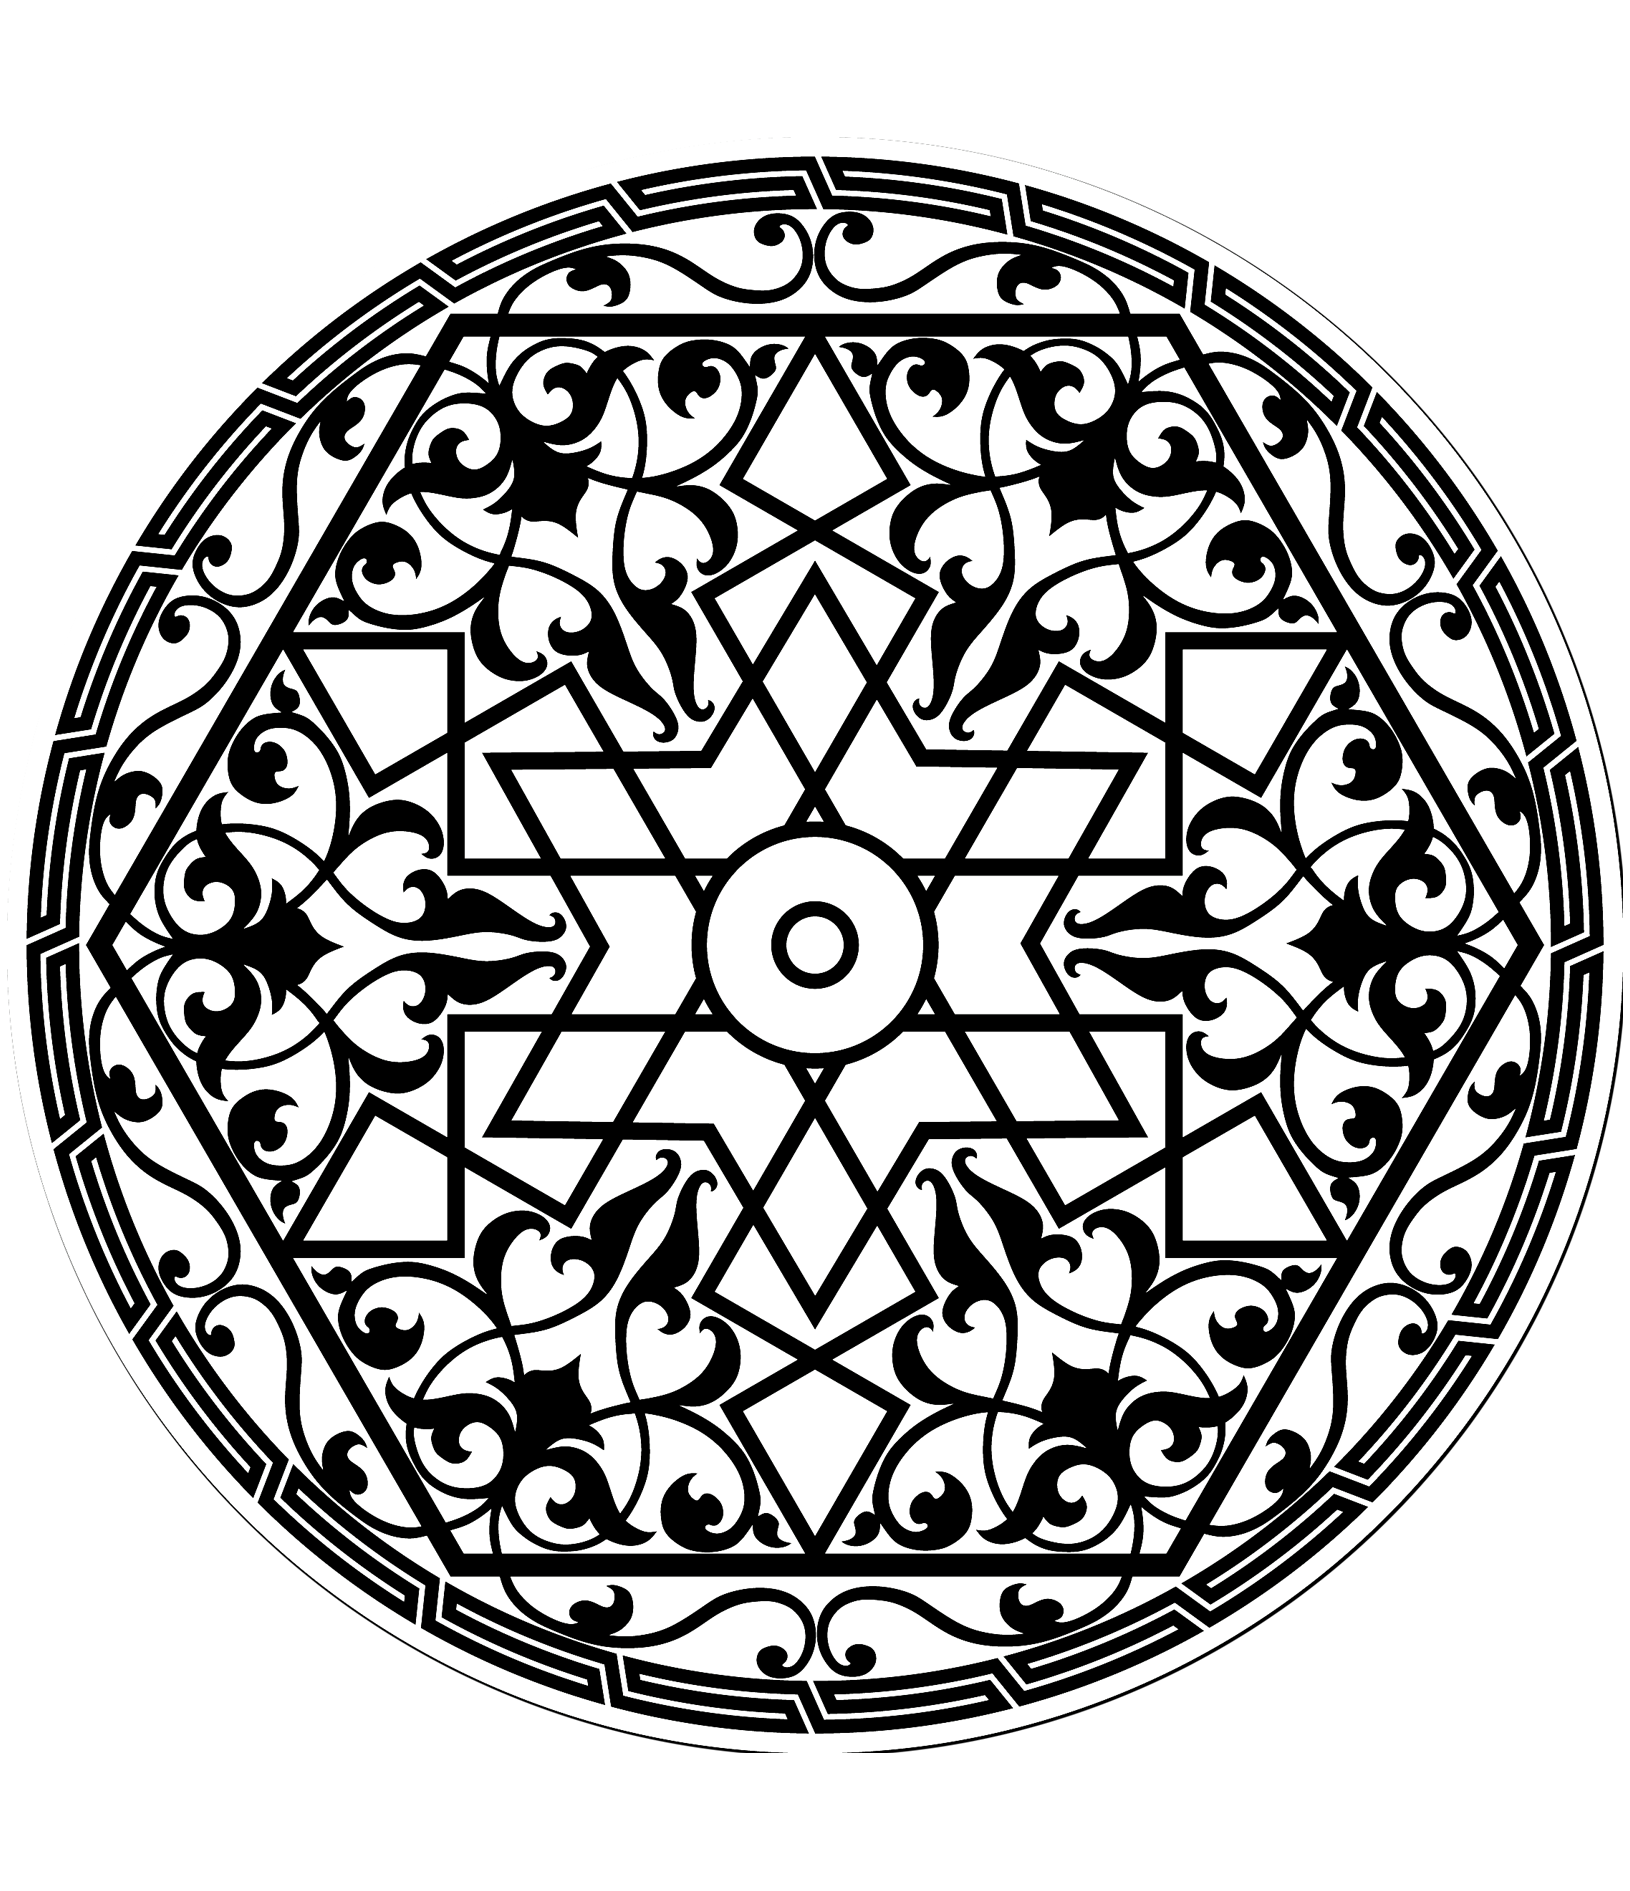 Arabic pattern drawing with a star in the middle